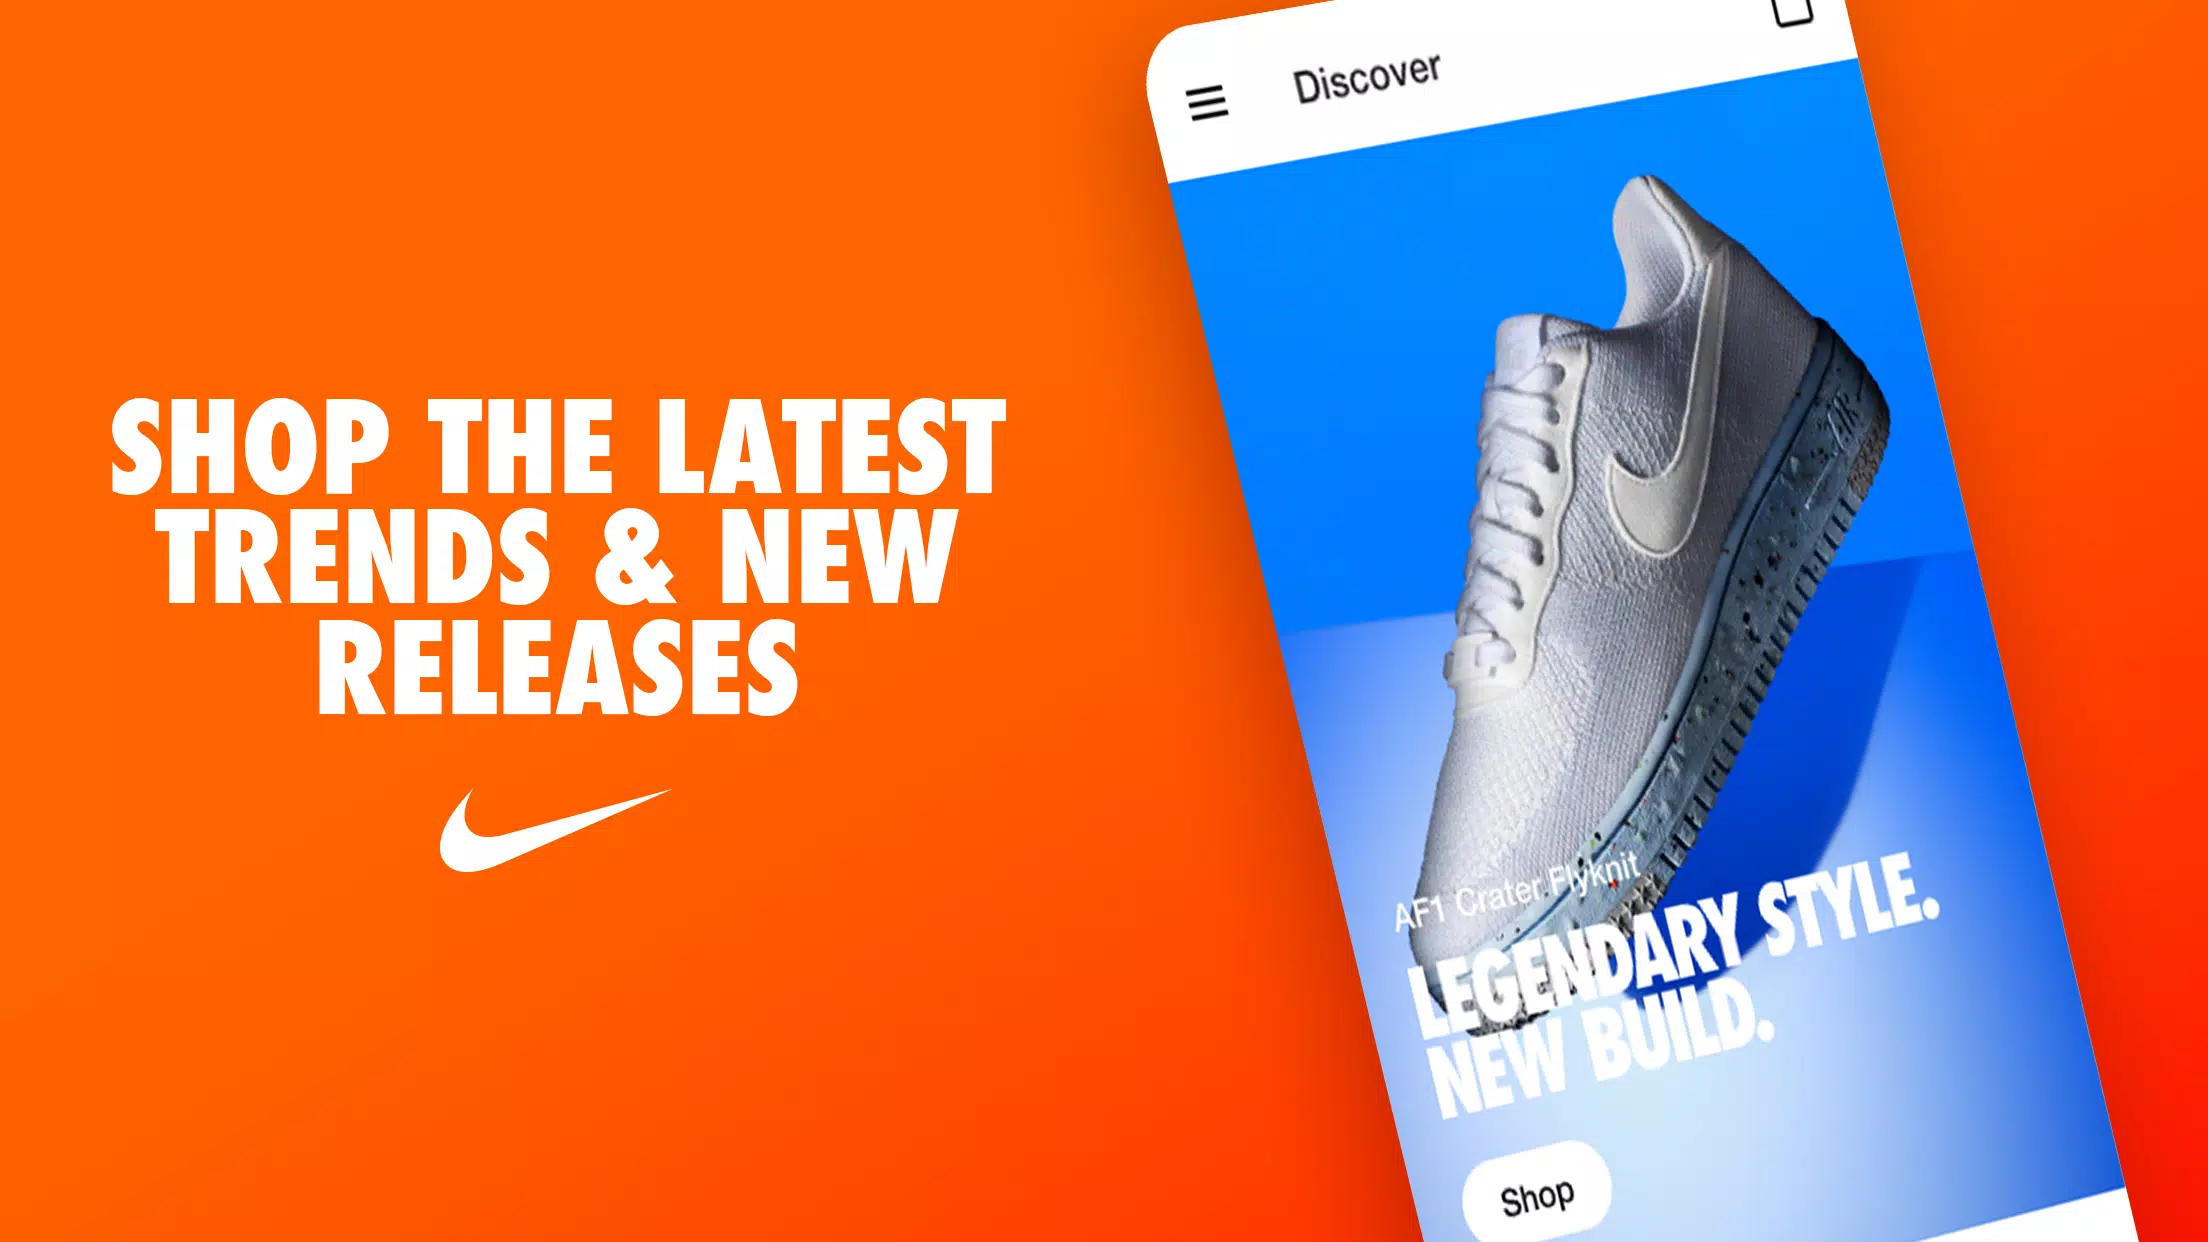 Nike for Android - APK Download